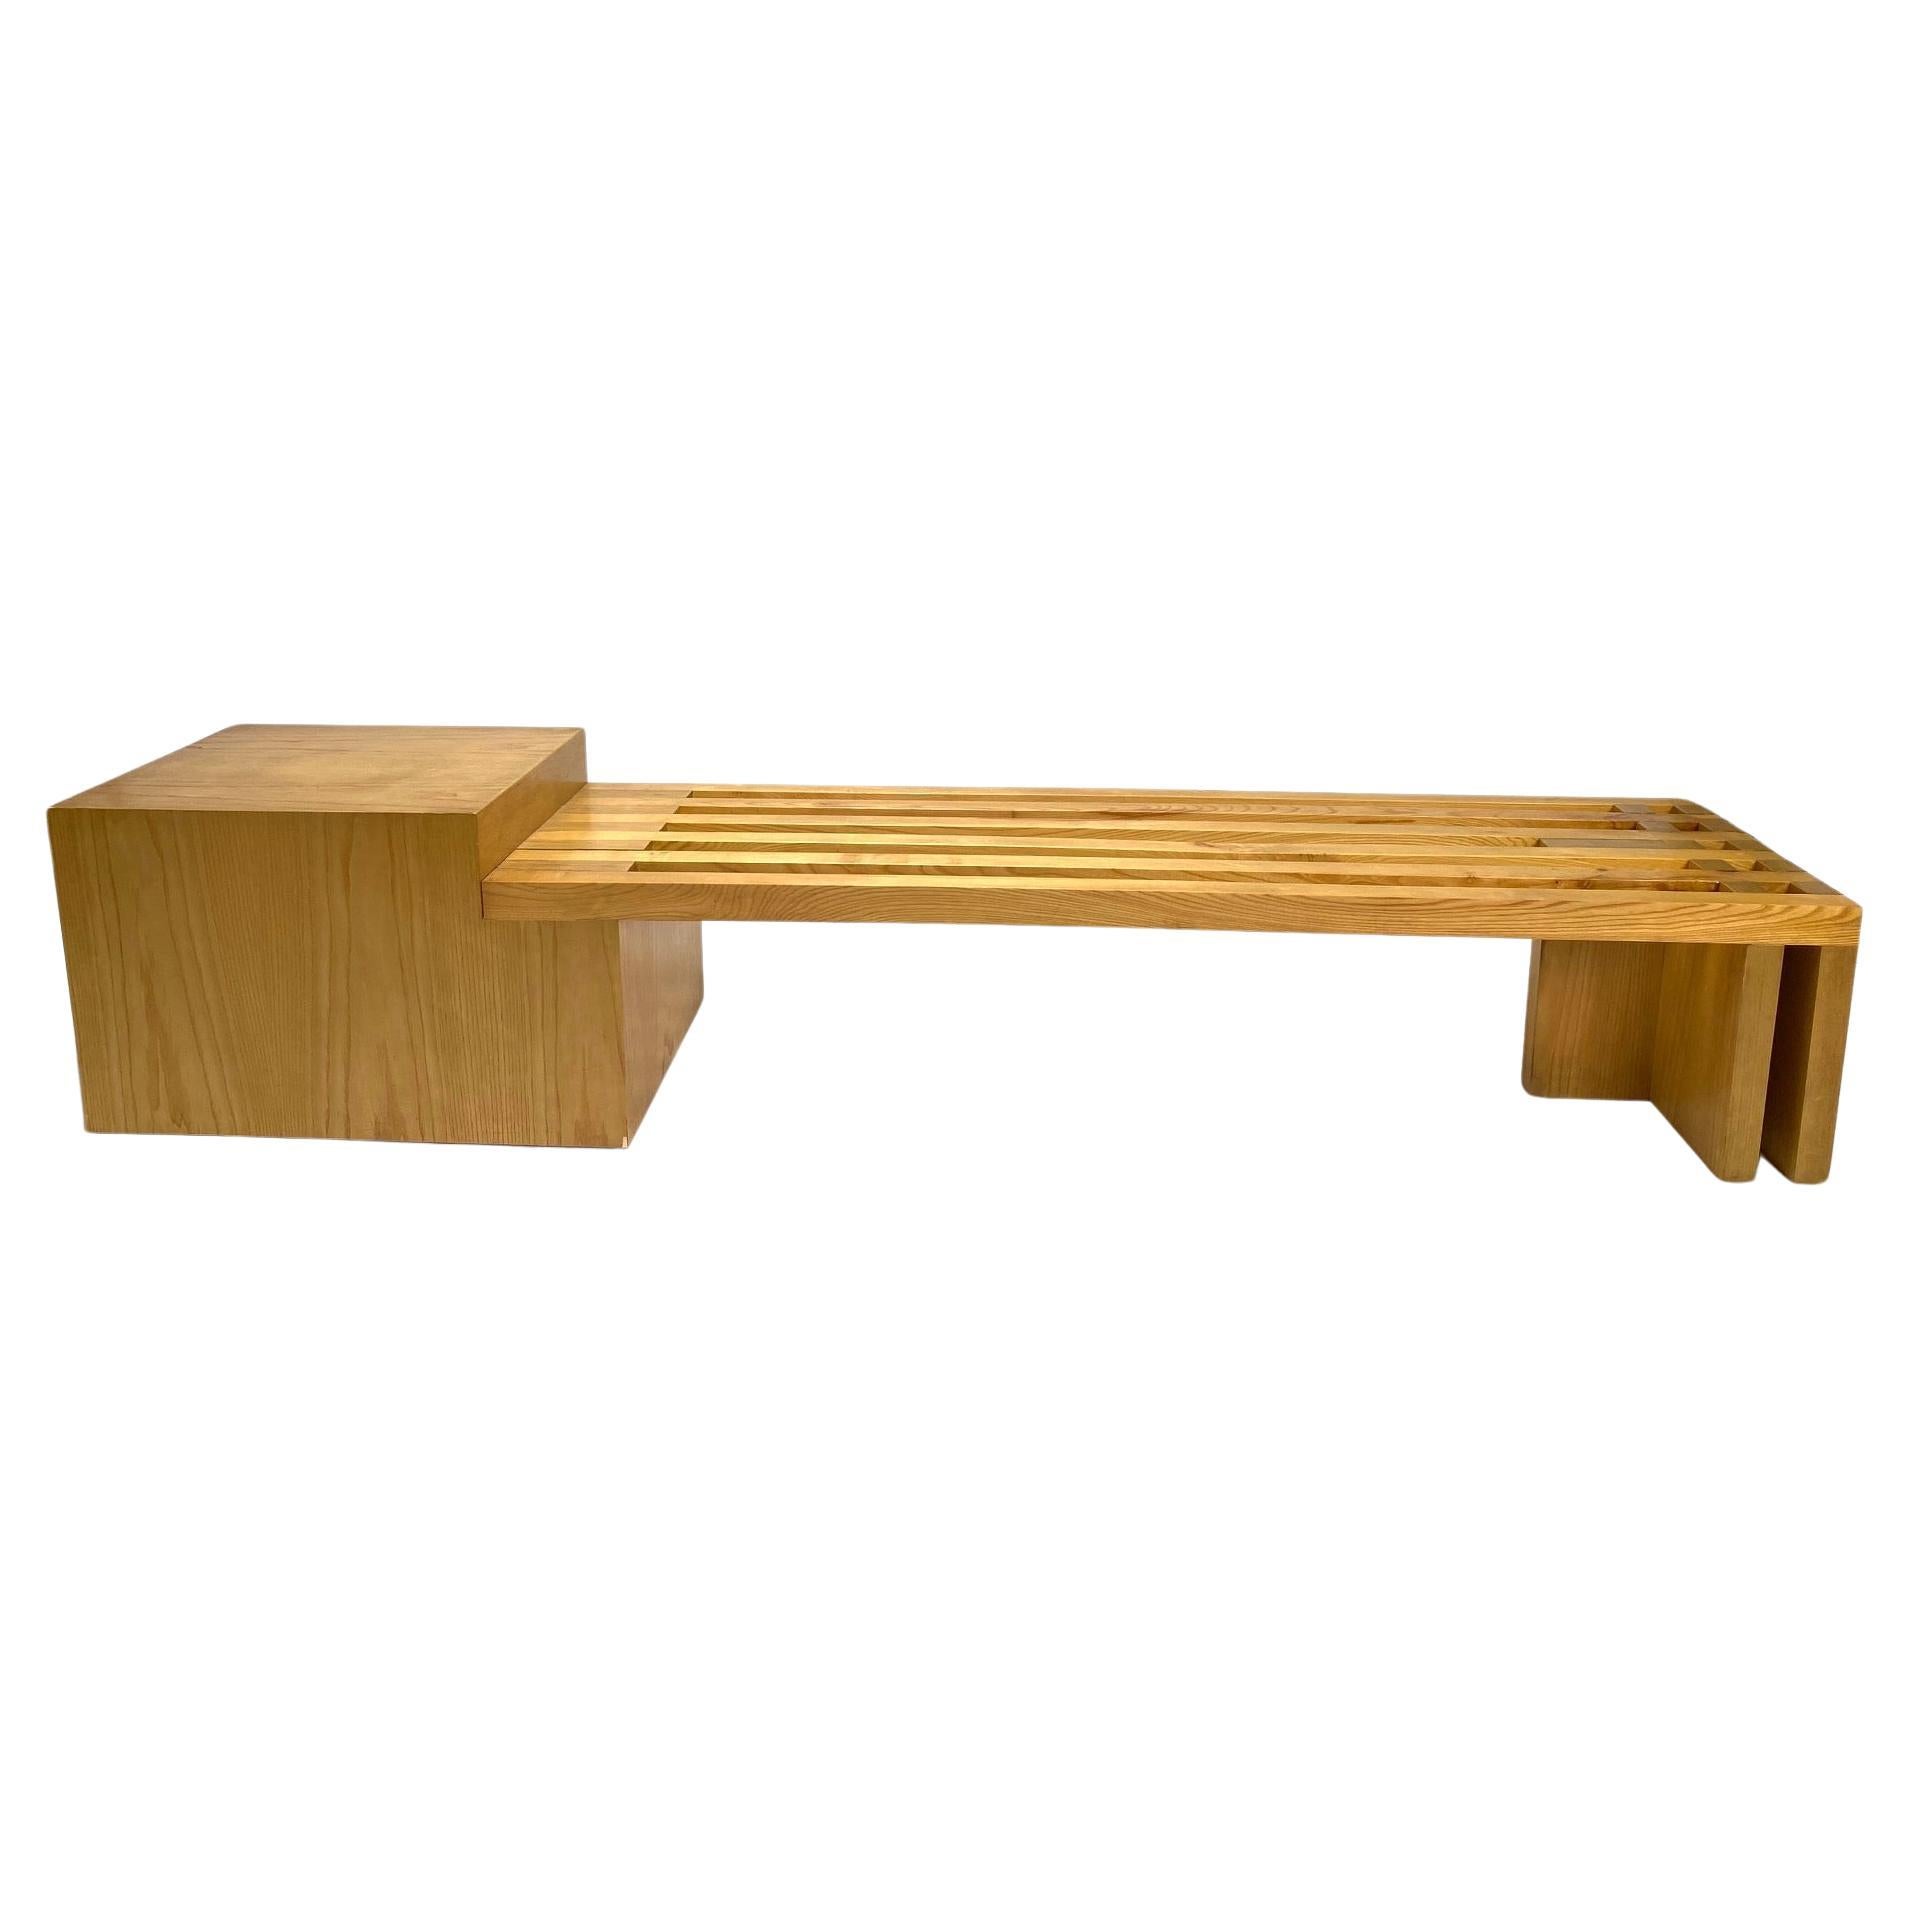 Monumental wooden bench by Bruno Nanni, Italy, 1970s For Sale